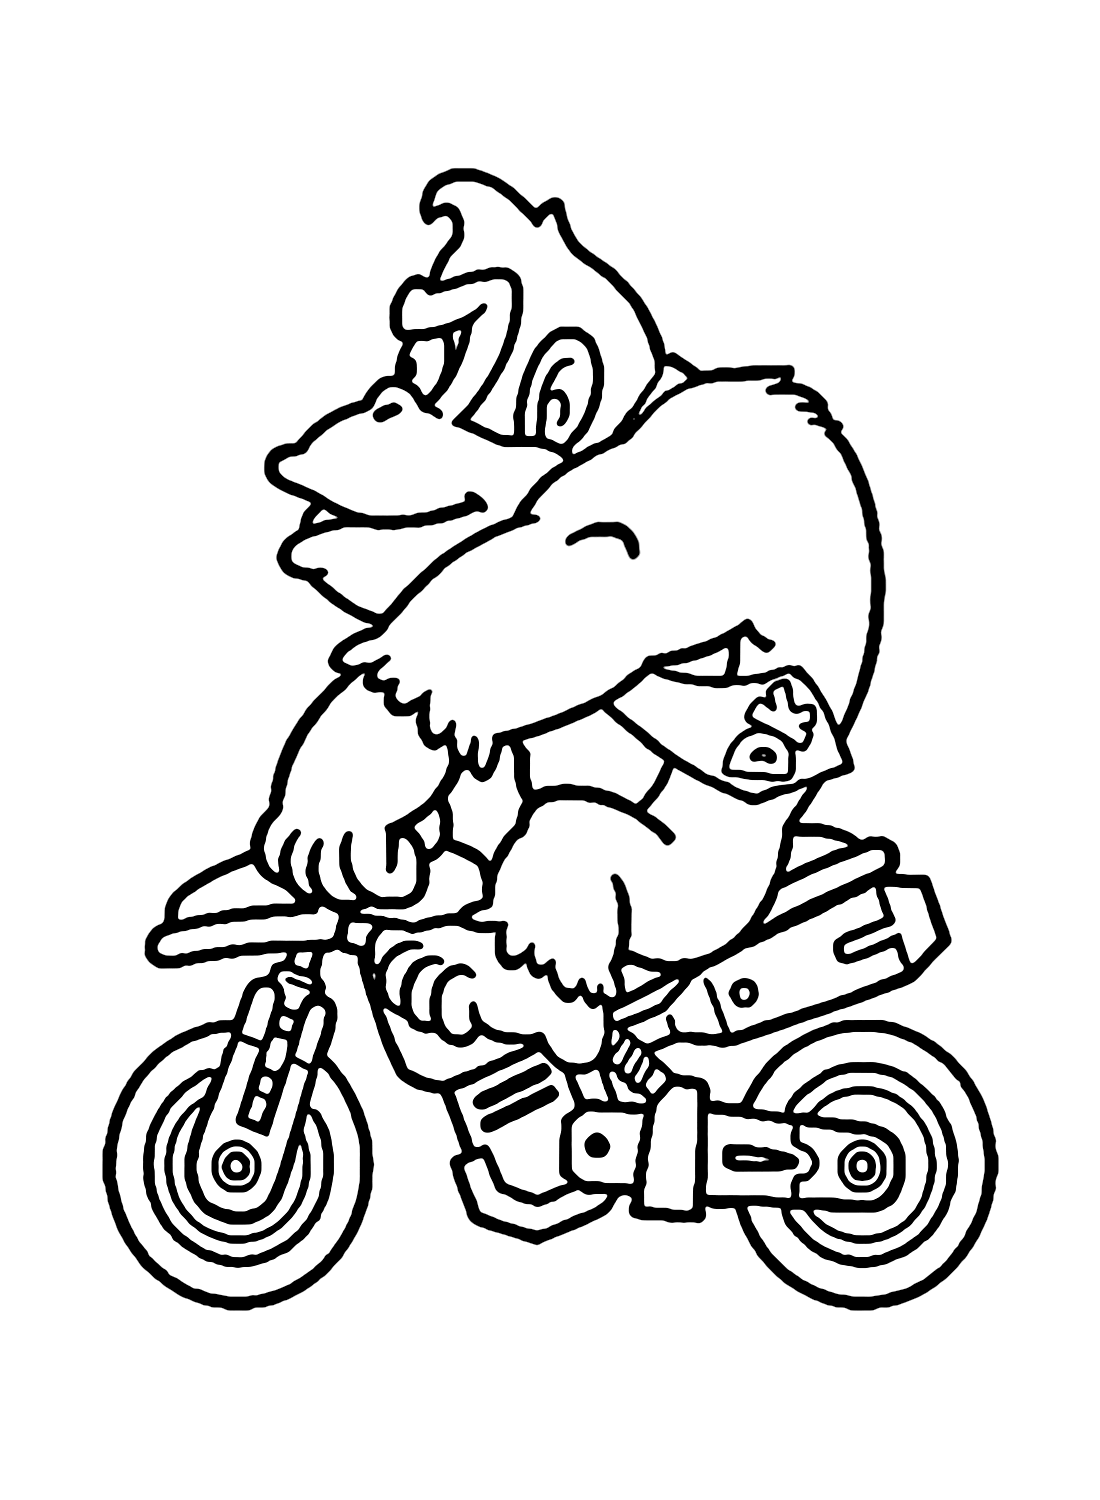 Donkey Kong from Mario Kart Coloring Pages